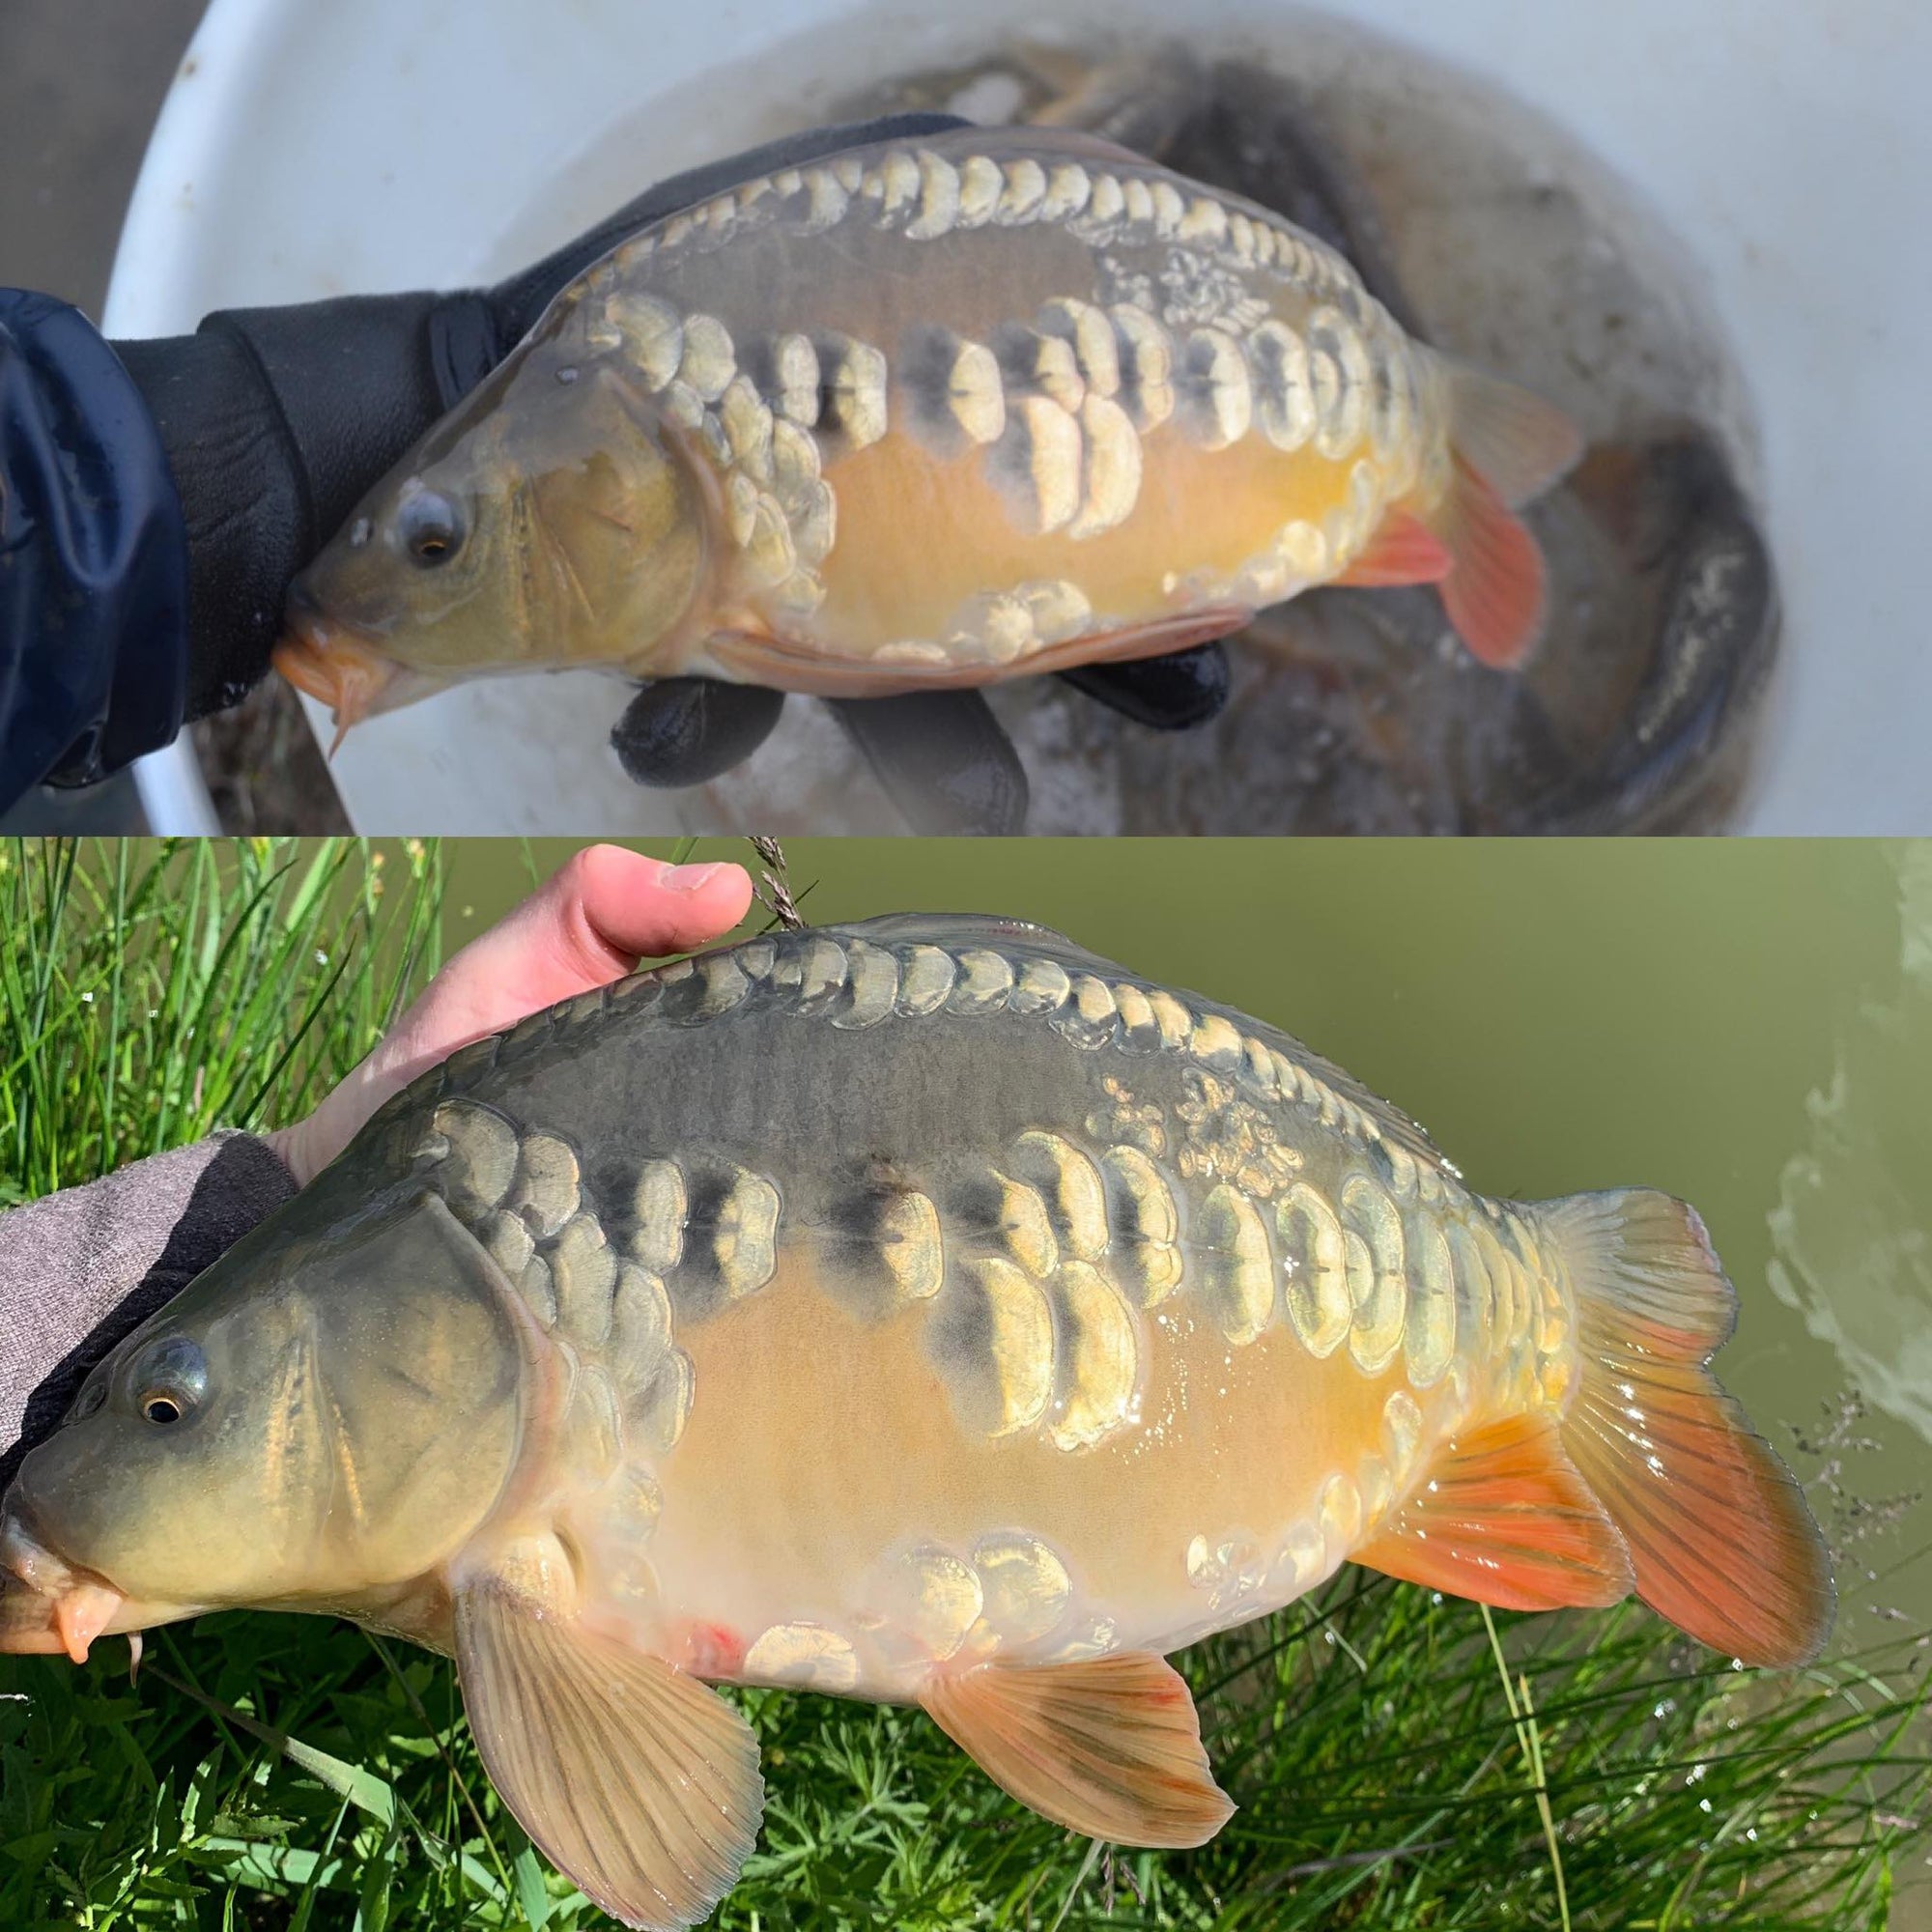 Early Carp growth at BP Milling, a great start to the growing season!